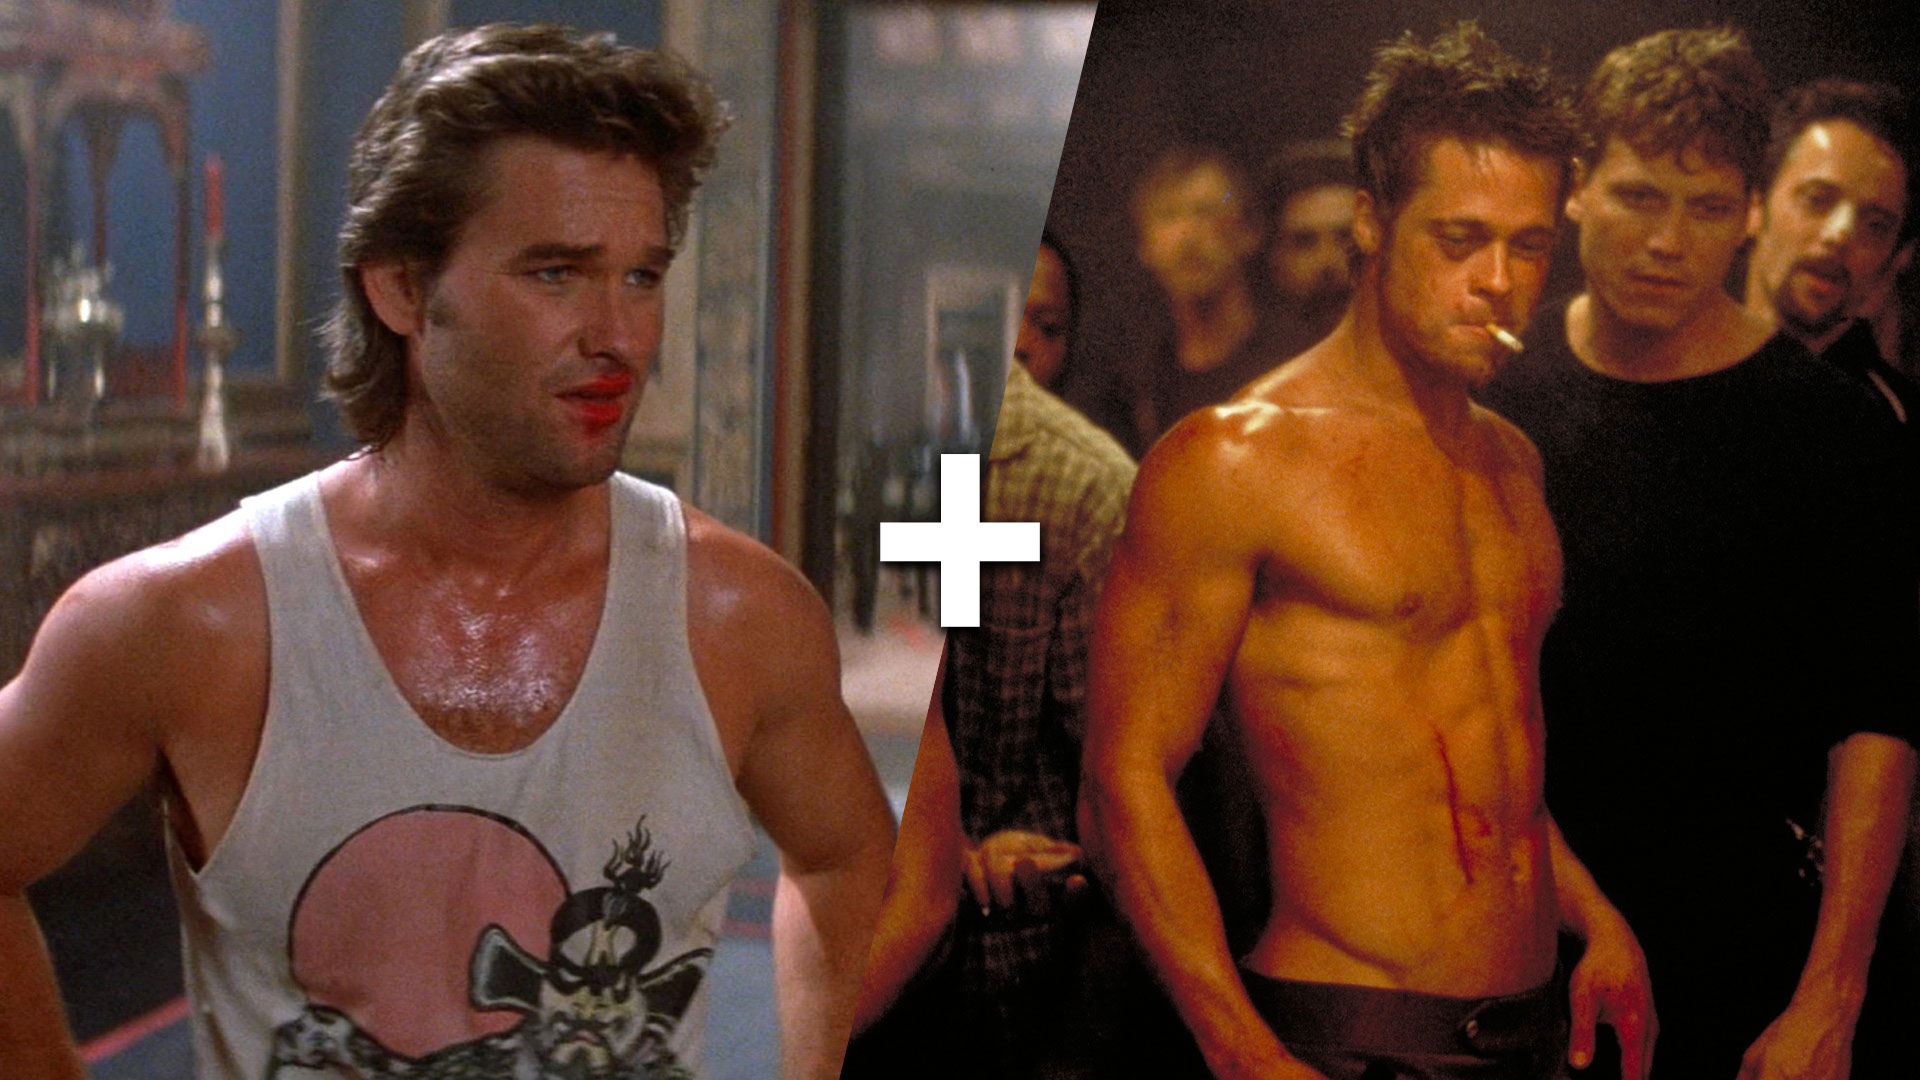 Big Trouble in Little China + Fight Club